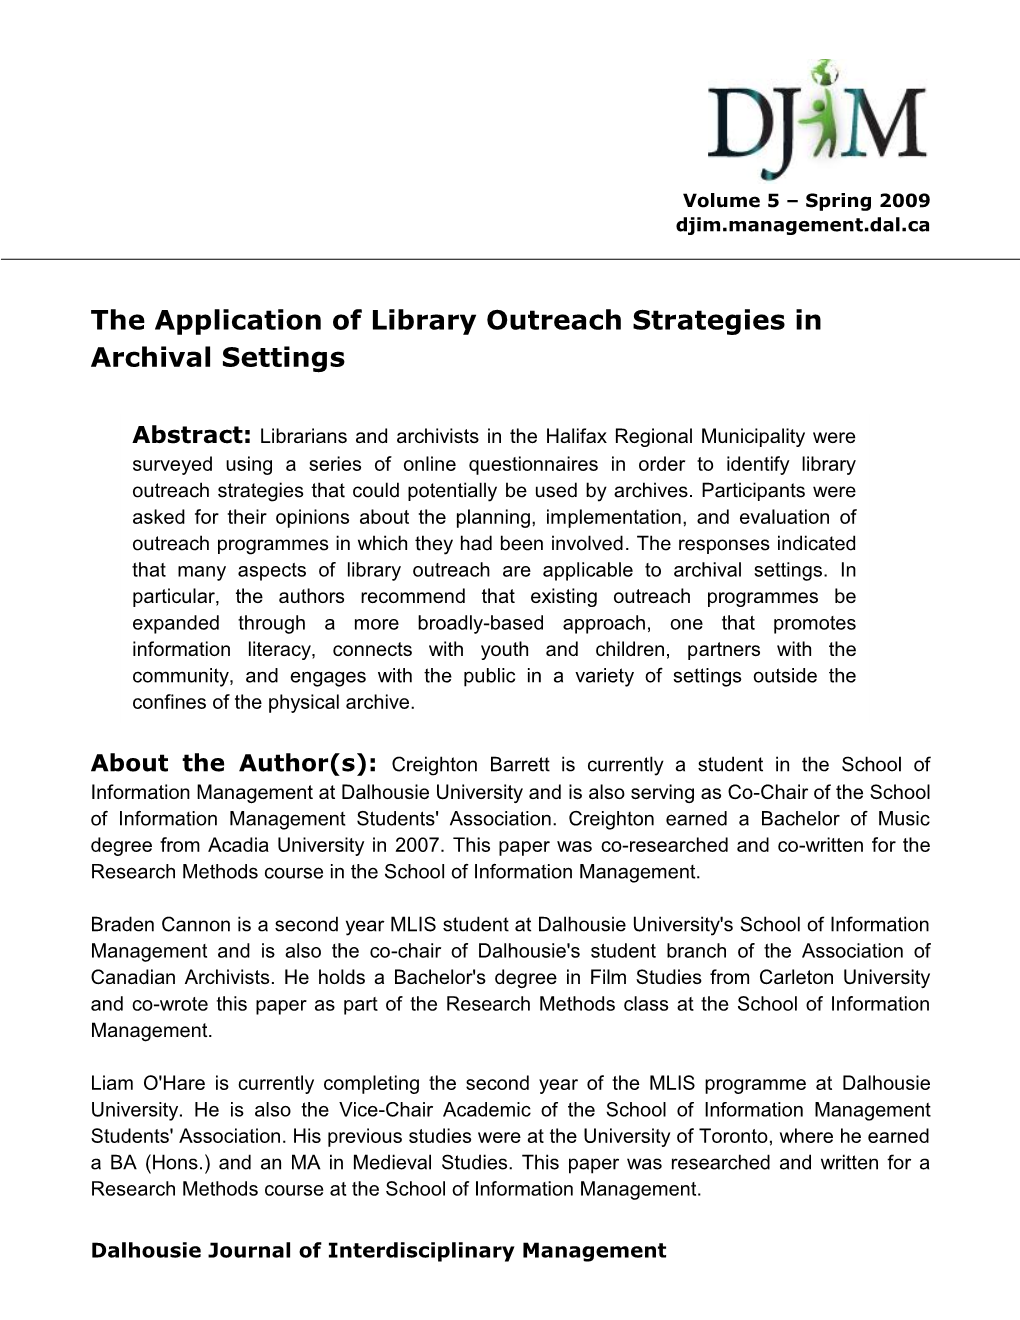 The Application of Library Outreach Strategies in Archival Settings